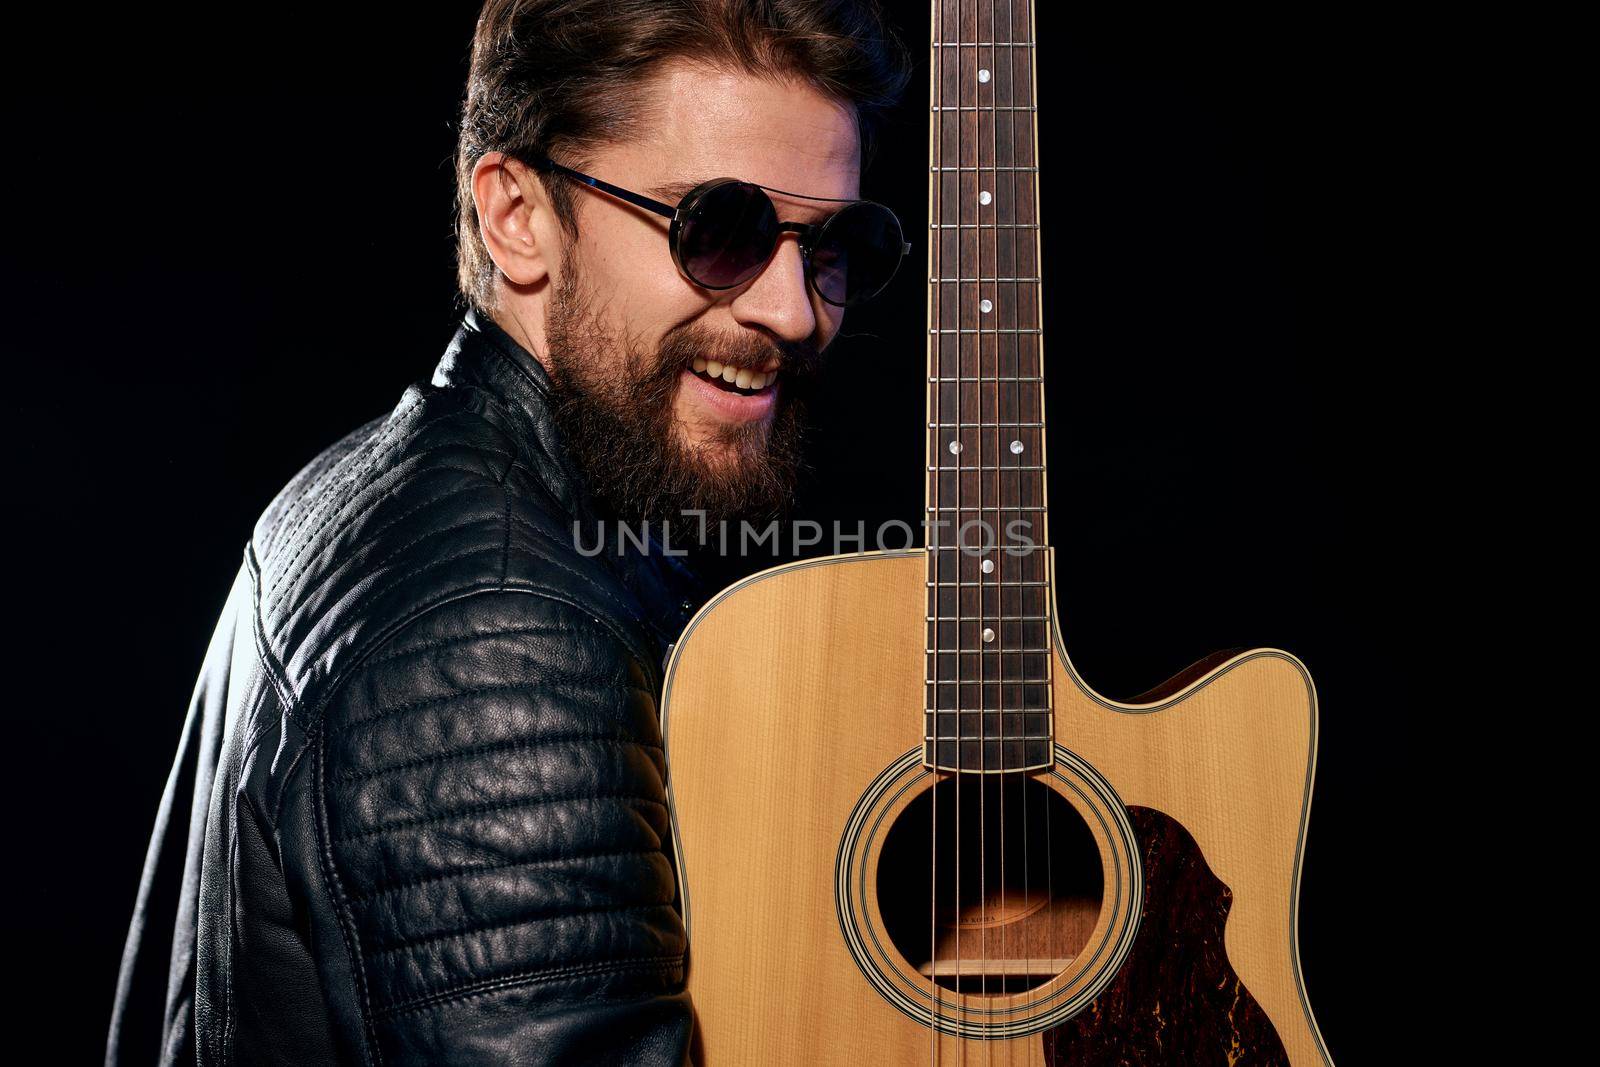 A man with a guitar in his hands leather jacket music performance rock star modern style dark background. High quality photo